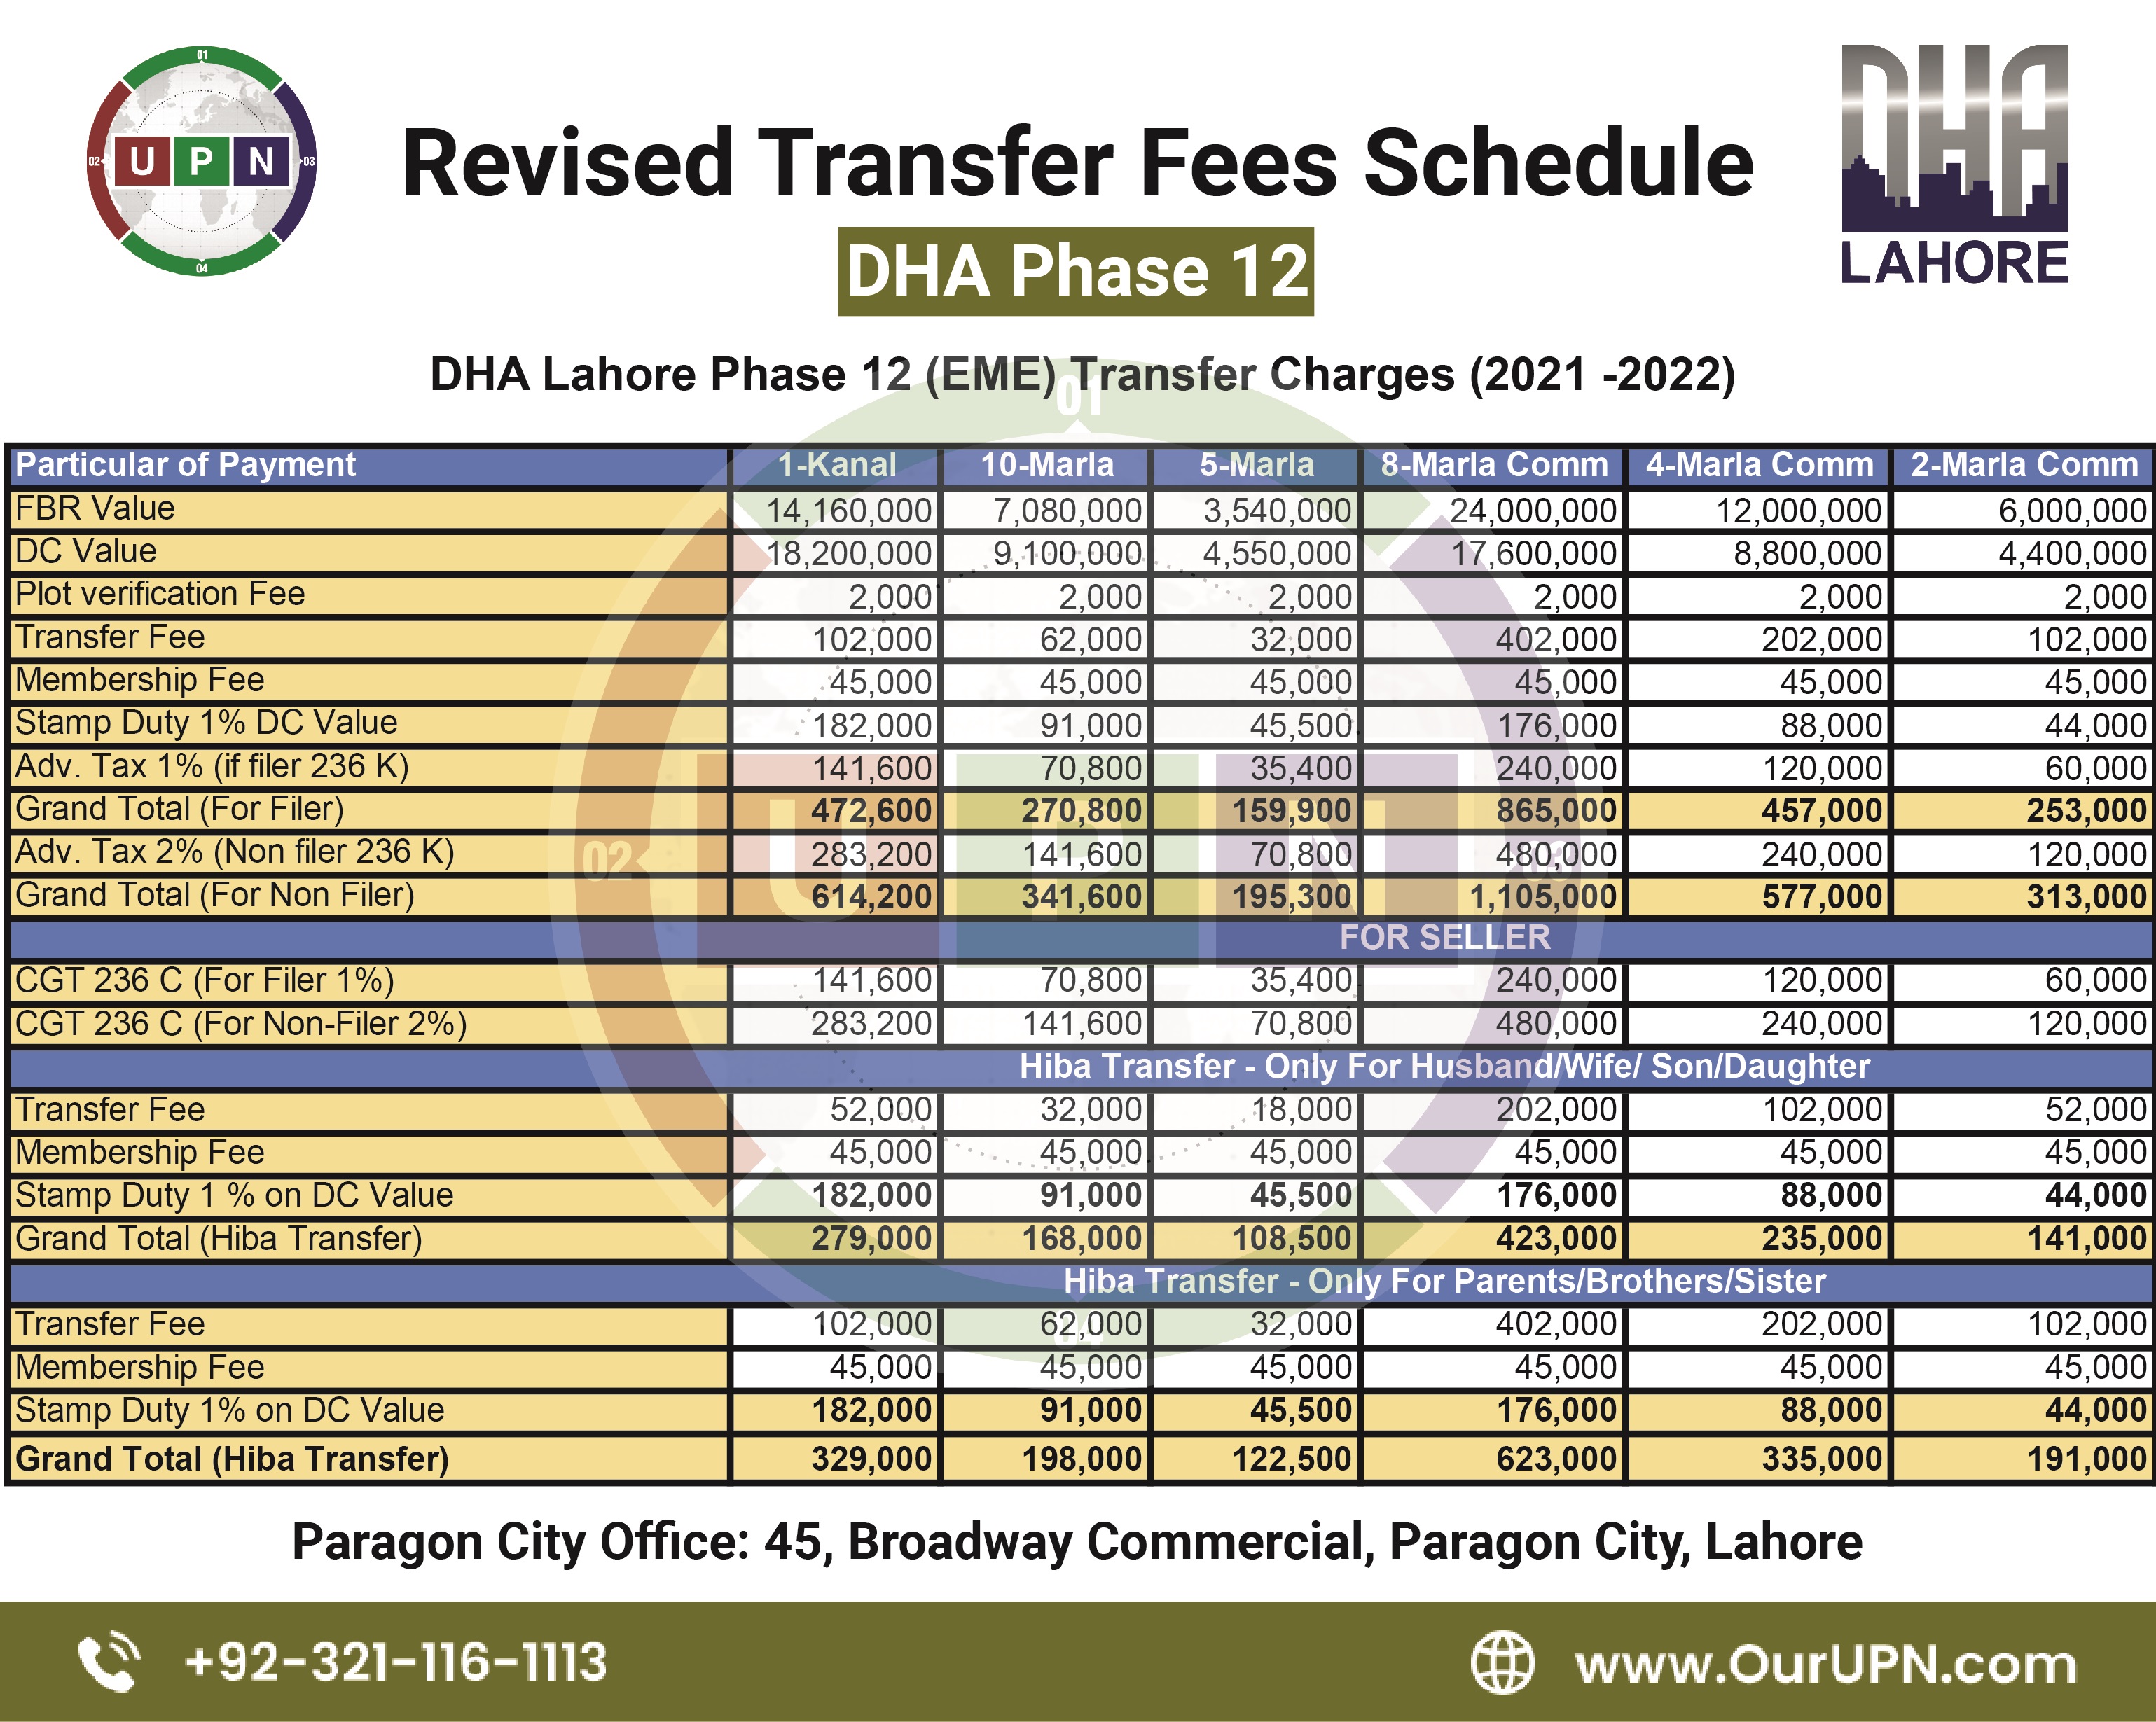 DHA Phase 12 Transfer Fees Schedule 2021-2022